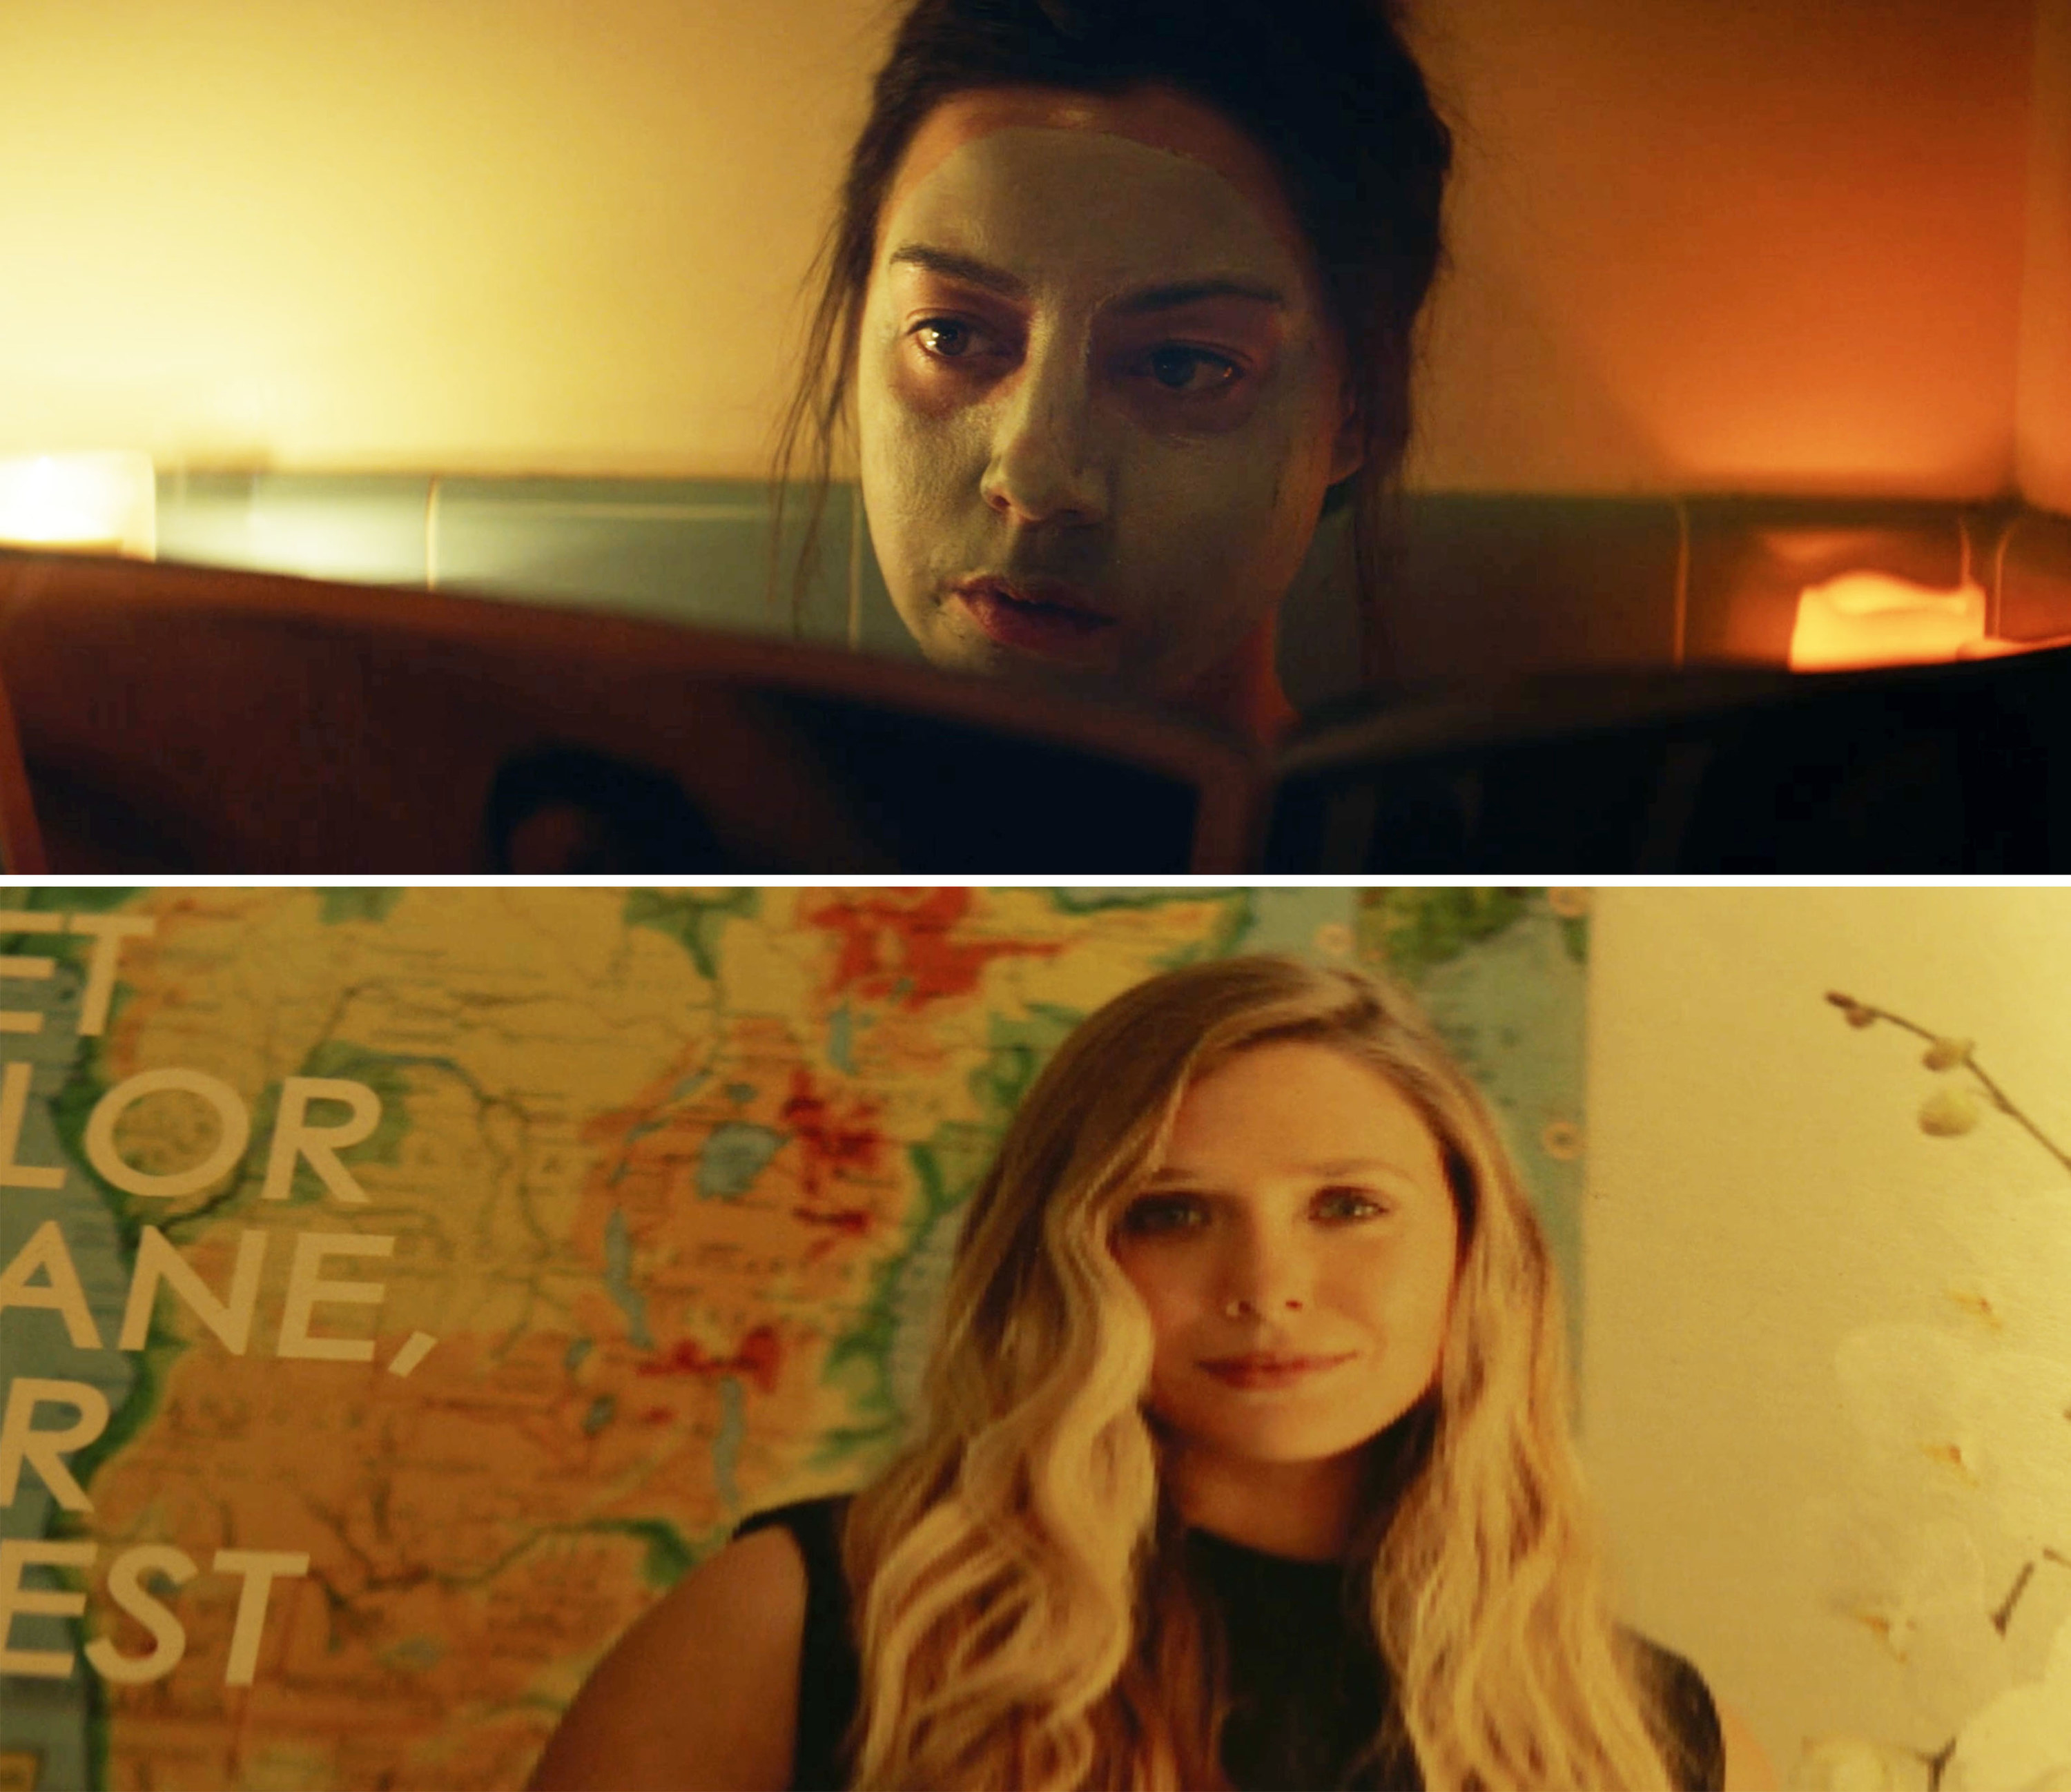 Screenshots from &quot;Ingrid Goes West&quot;